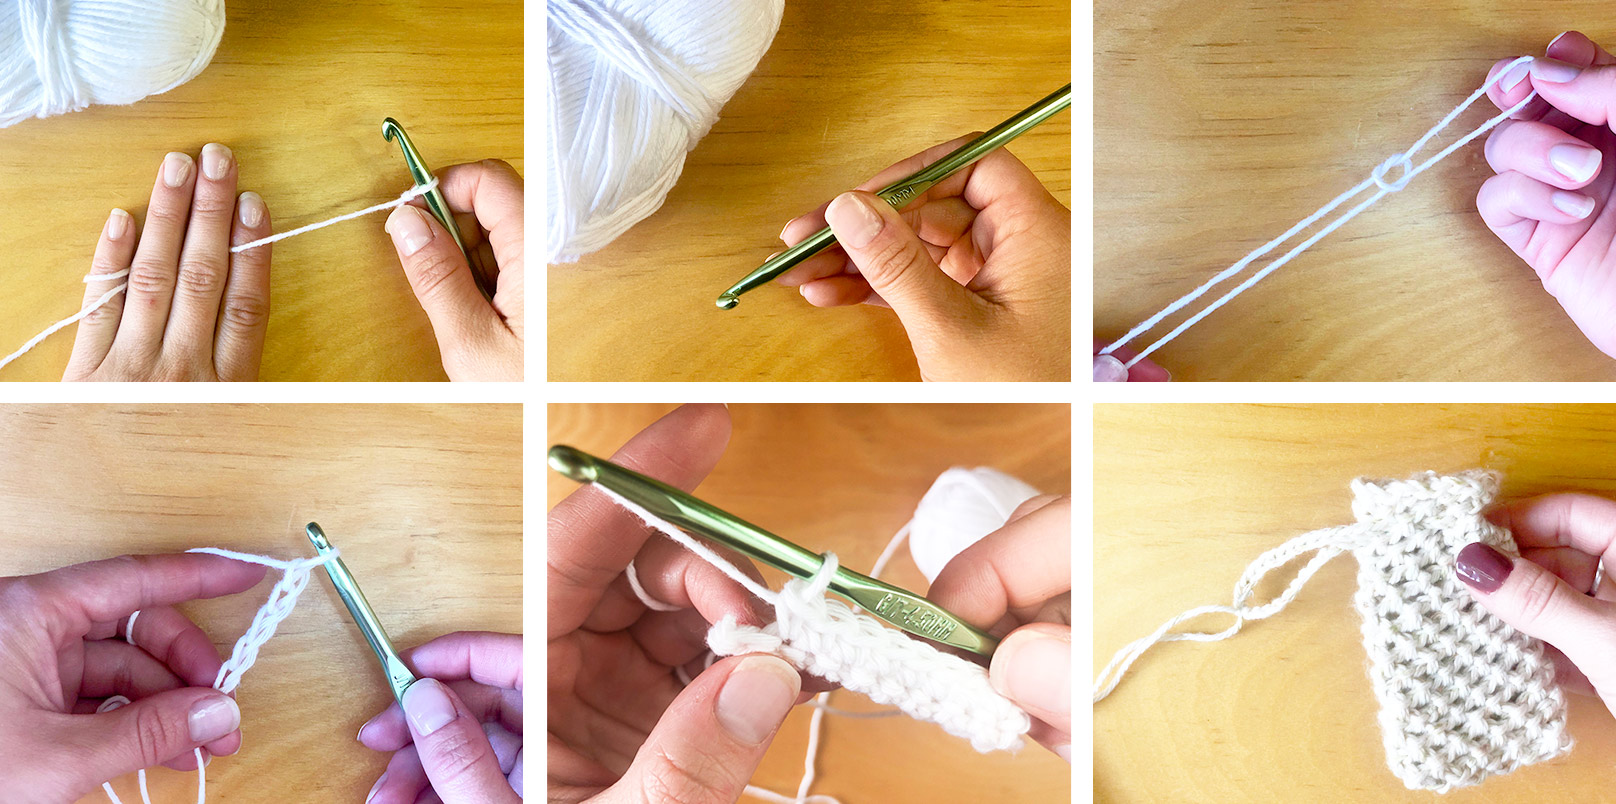 Learn to Crochet Easily - Step-by-Step Tutorial for Beginners